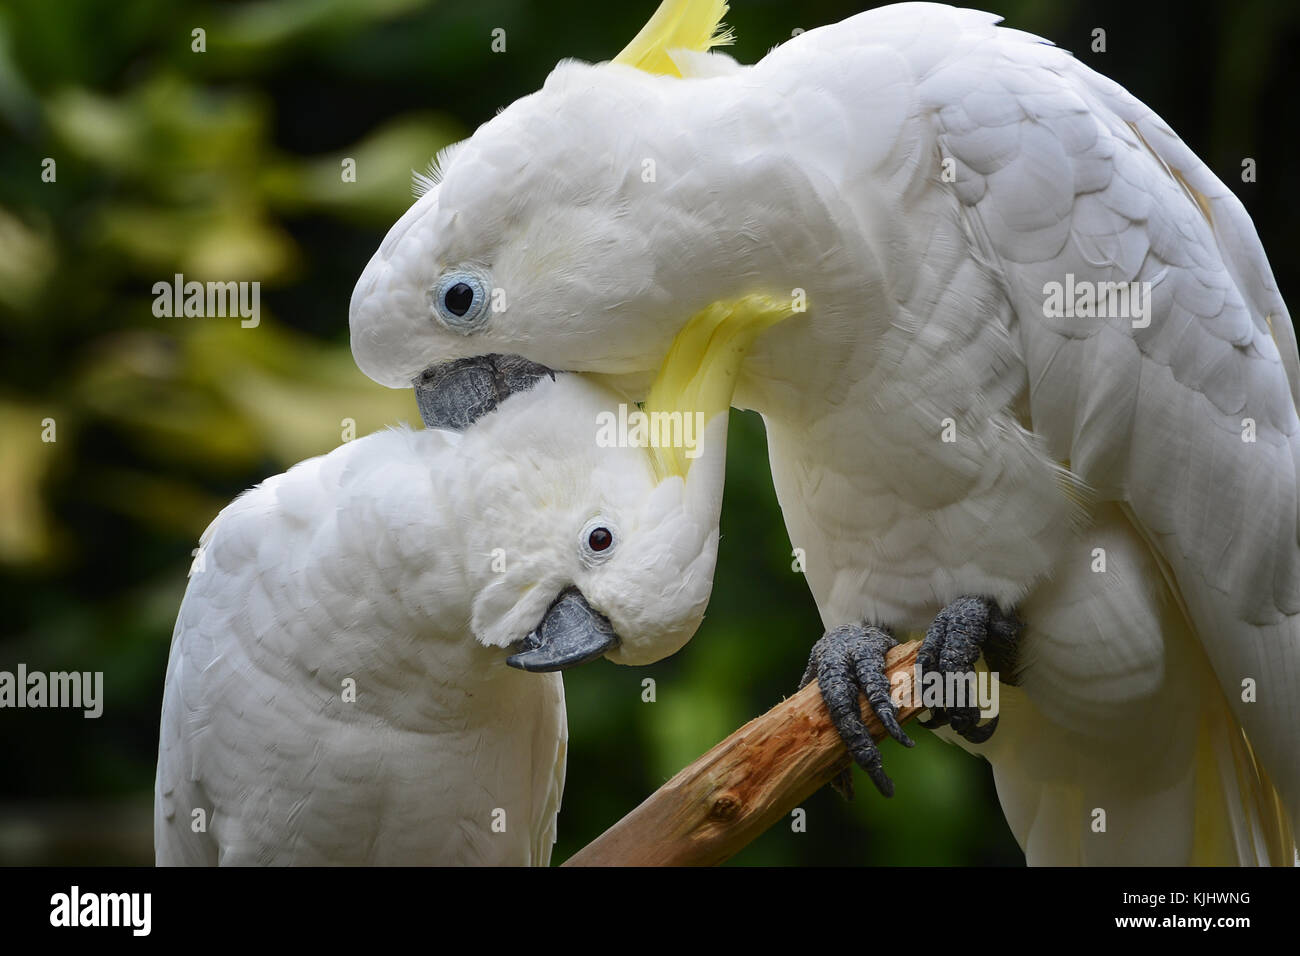 Two Yellow-crested Cockatoo birds, Bogor, West Java, Indonesia Stock Photo